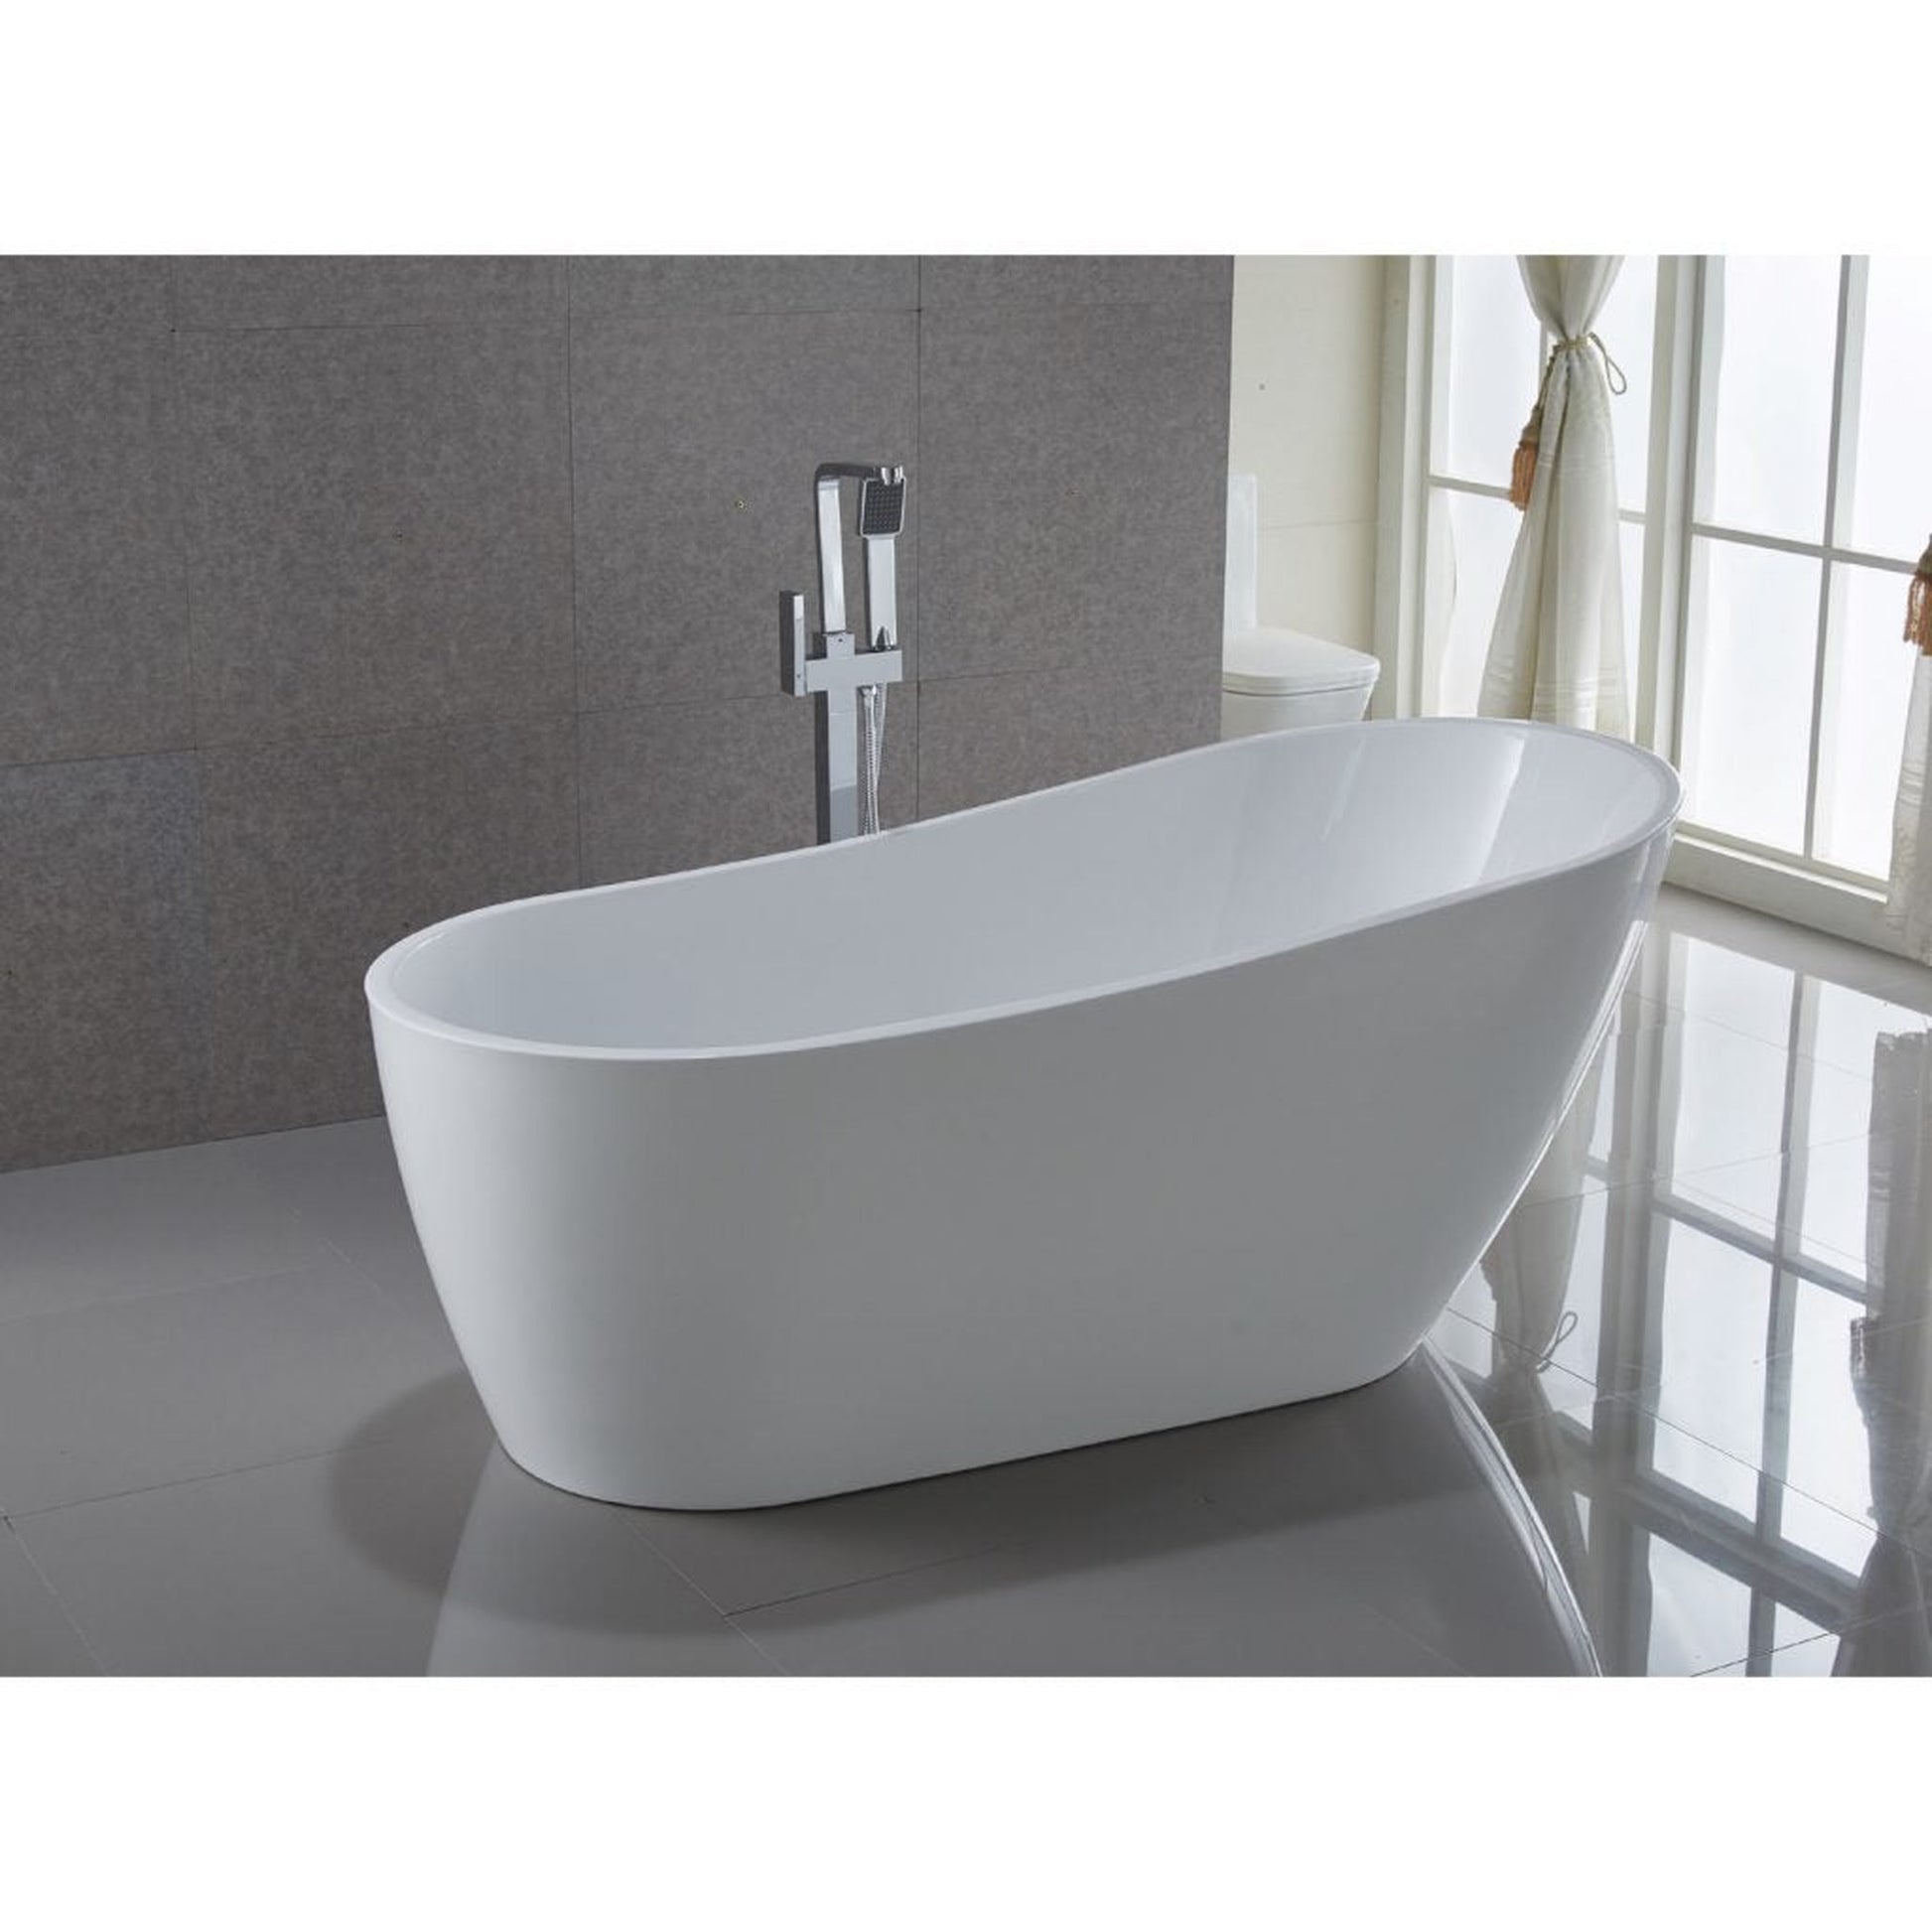 ANZZI Trend Series 67" x 32" Glossy White Freestanding Bathtub With Built-In Overflow and Pop-Up Drain